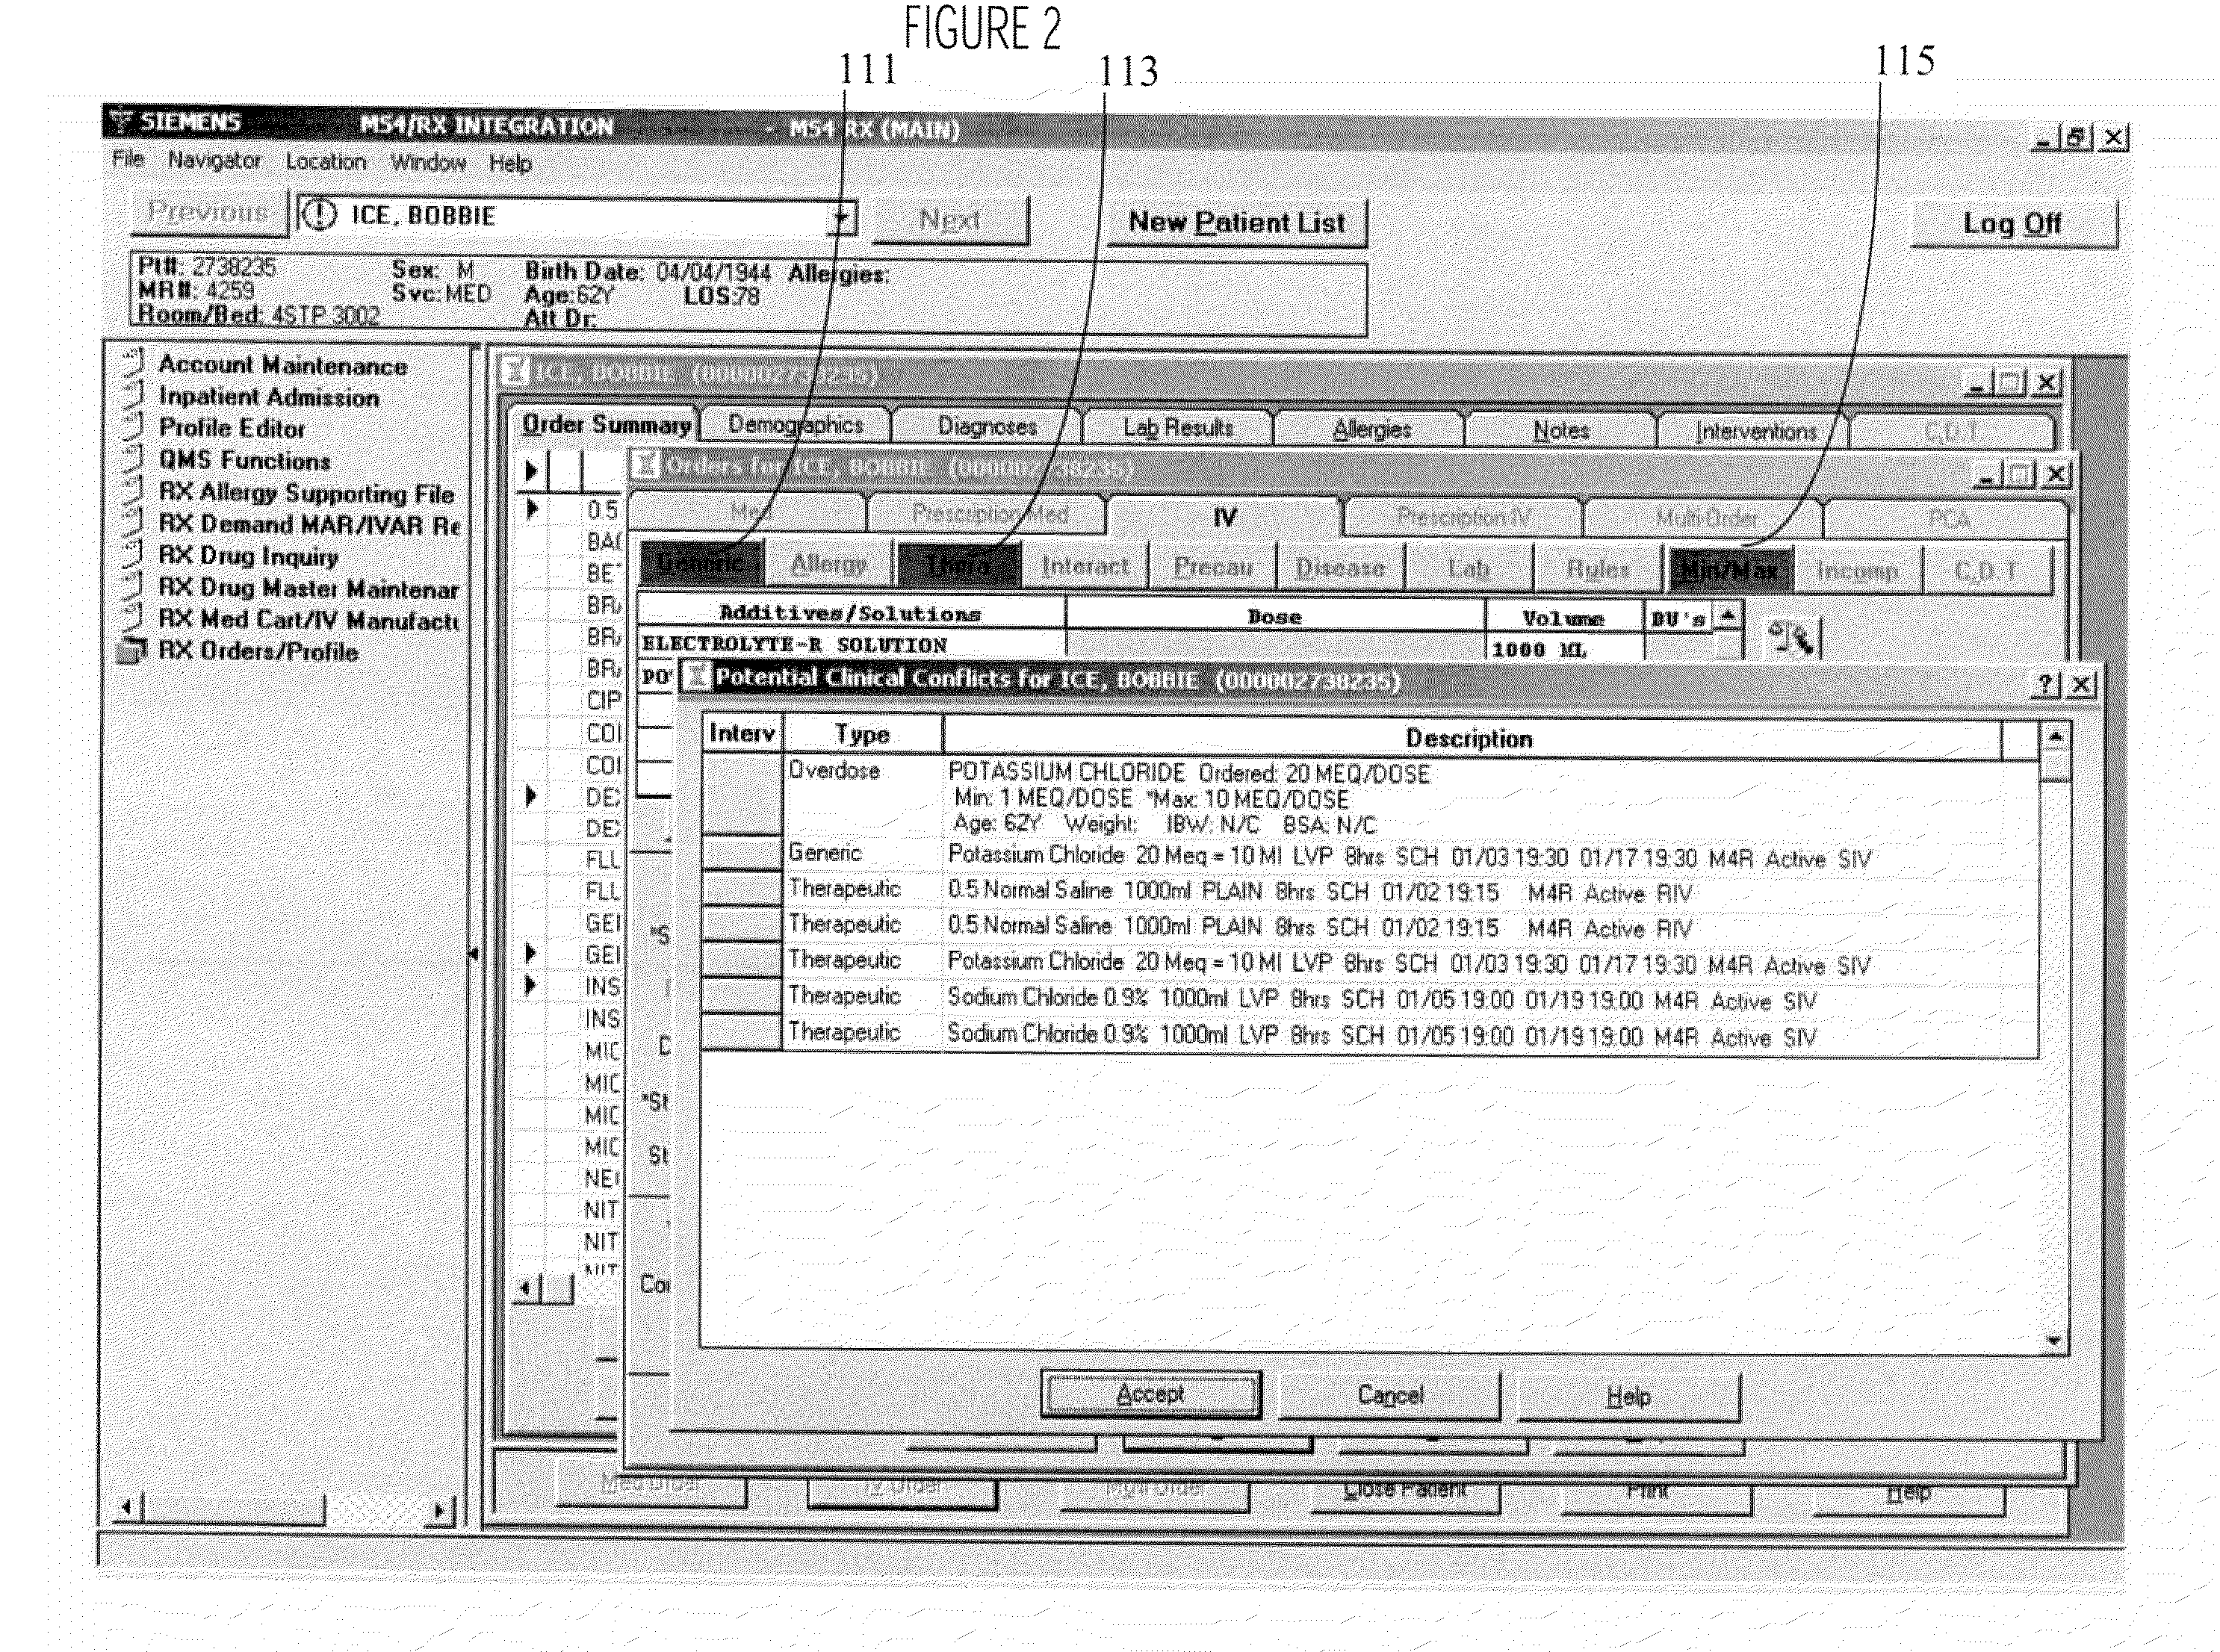 Computerized Treatment Order and Associated Alert Processing System